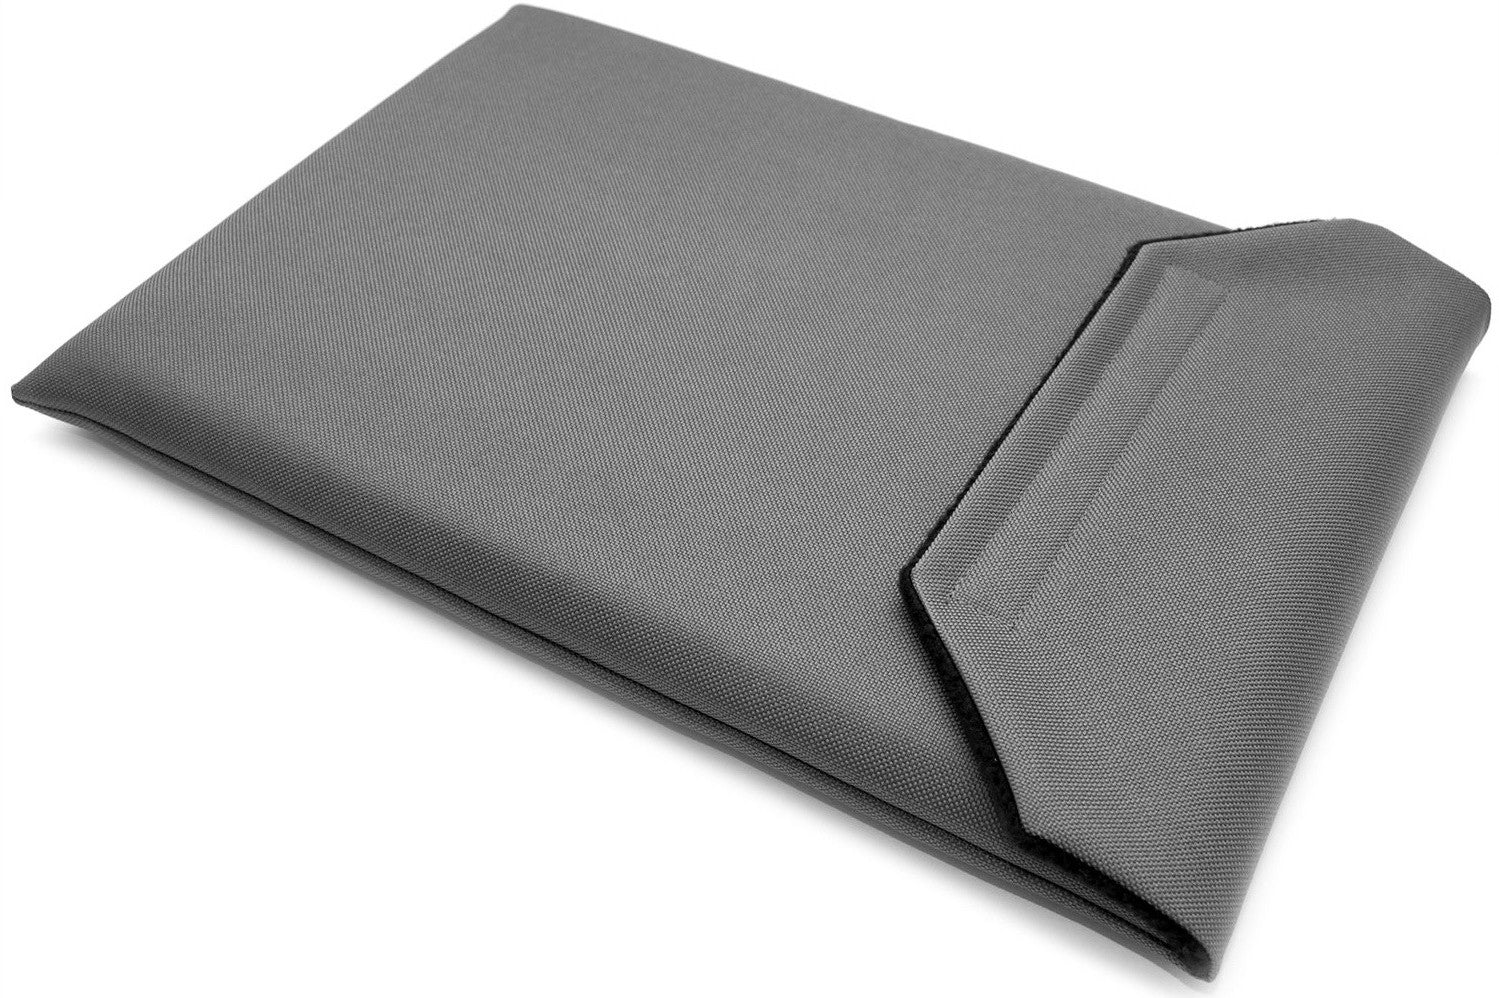 Surface Laptop 2/3/4 13-inch Sleeve Case